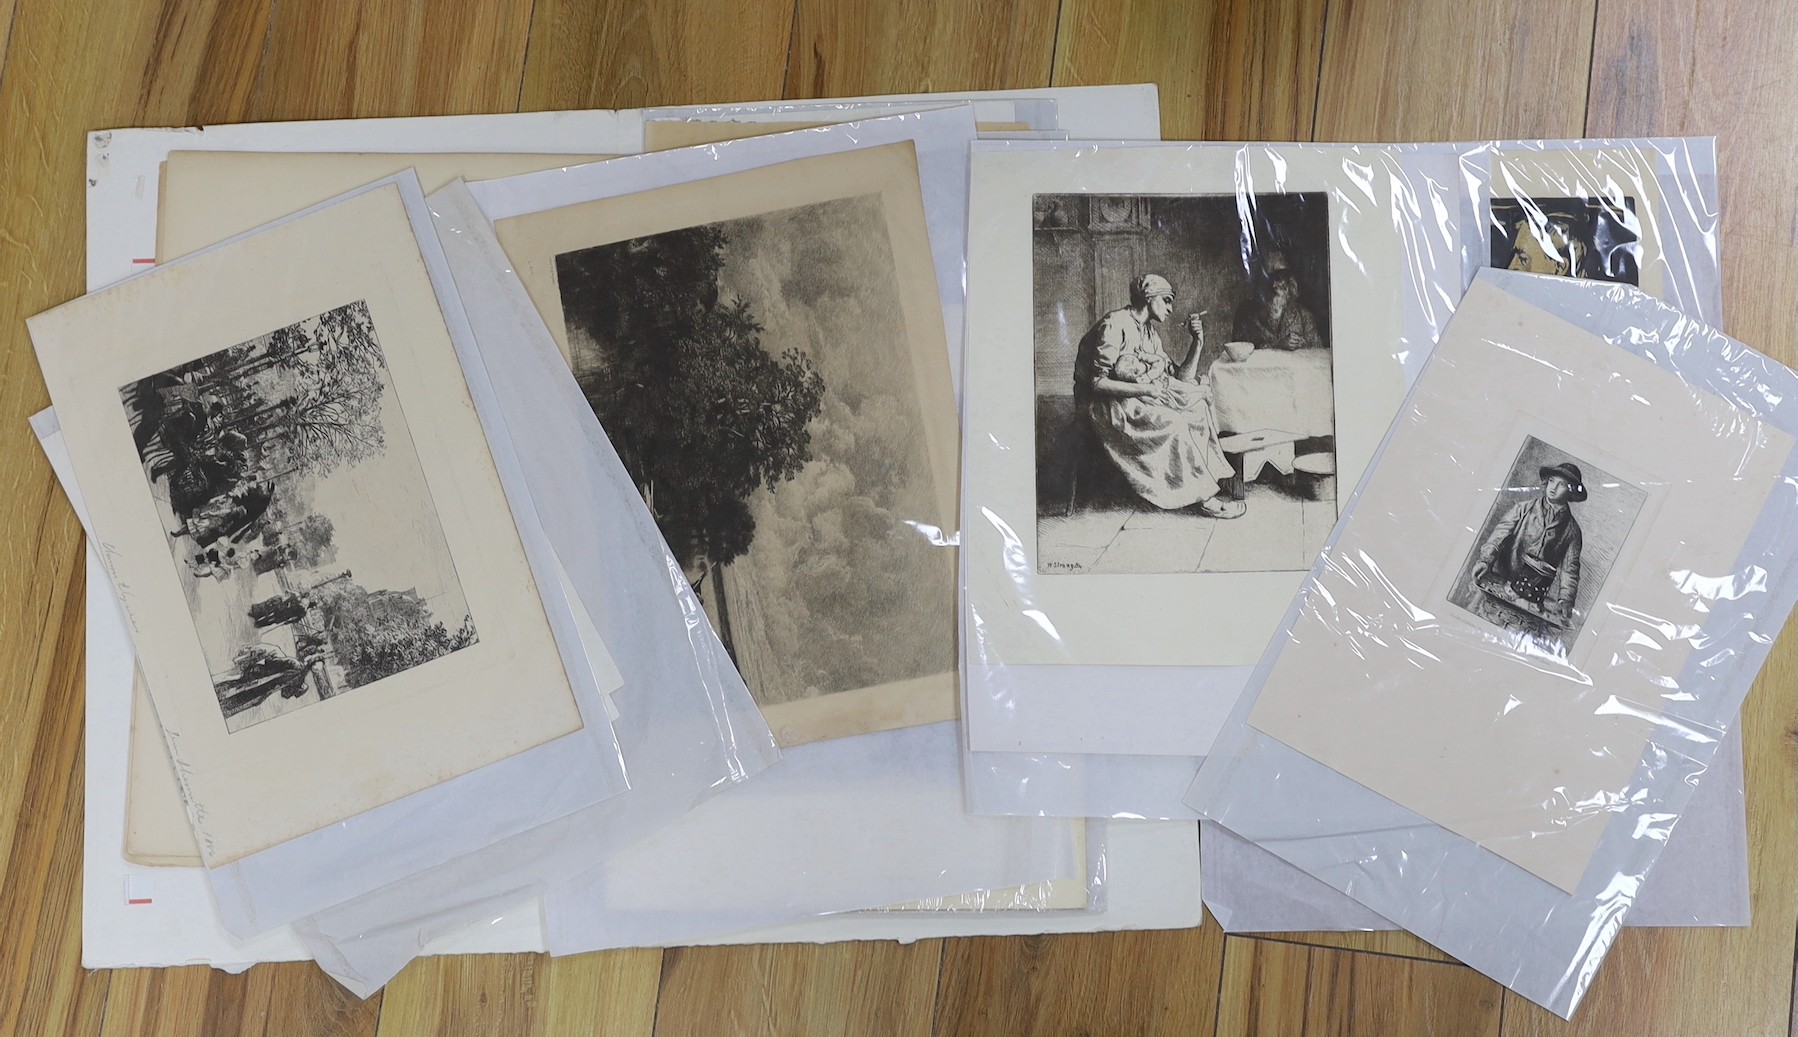 A folio of assorted prints, including an A. Legros etching, a Brangwyn autolithograph - The Mine and La Thangue lithograph